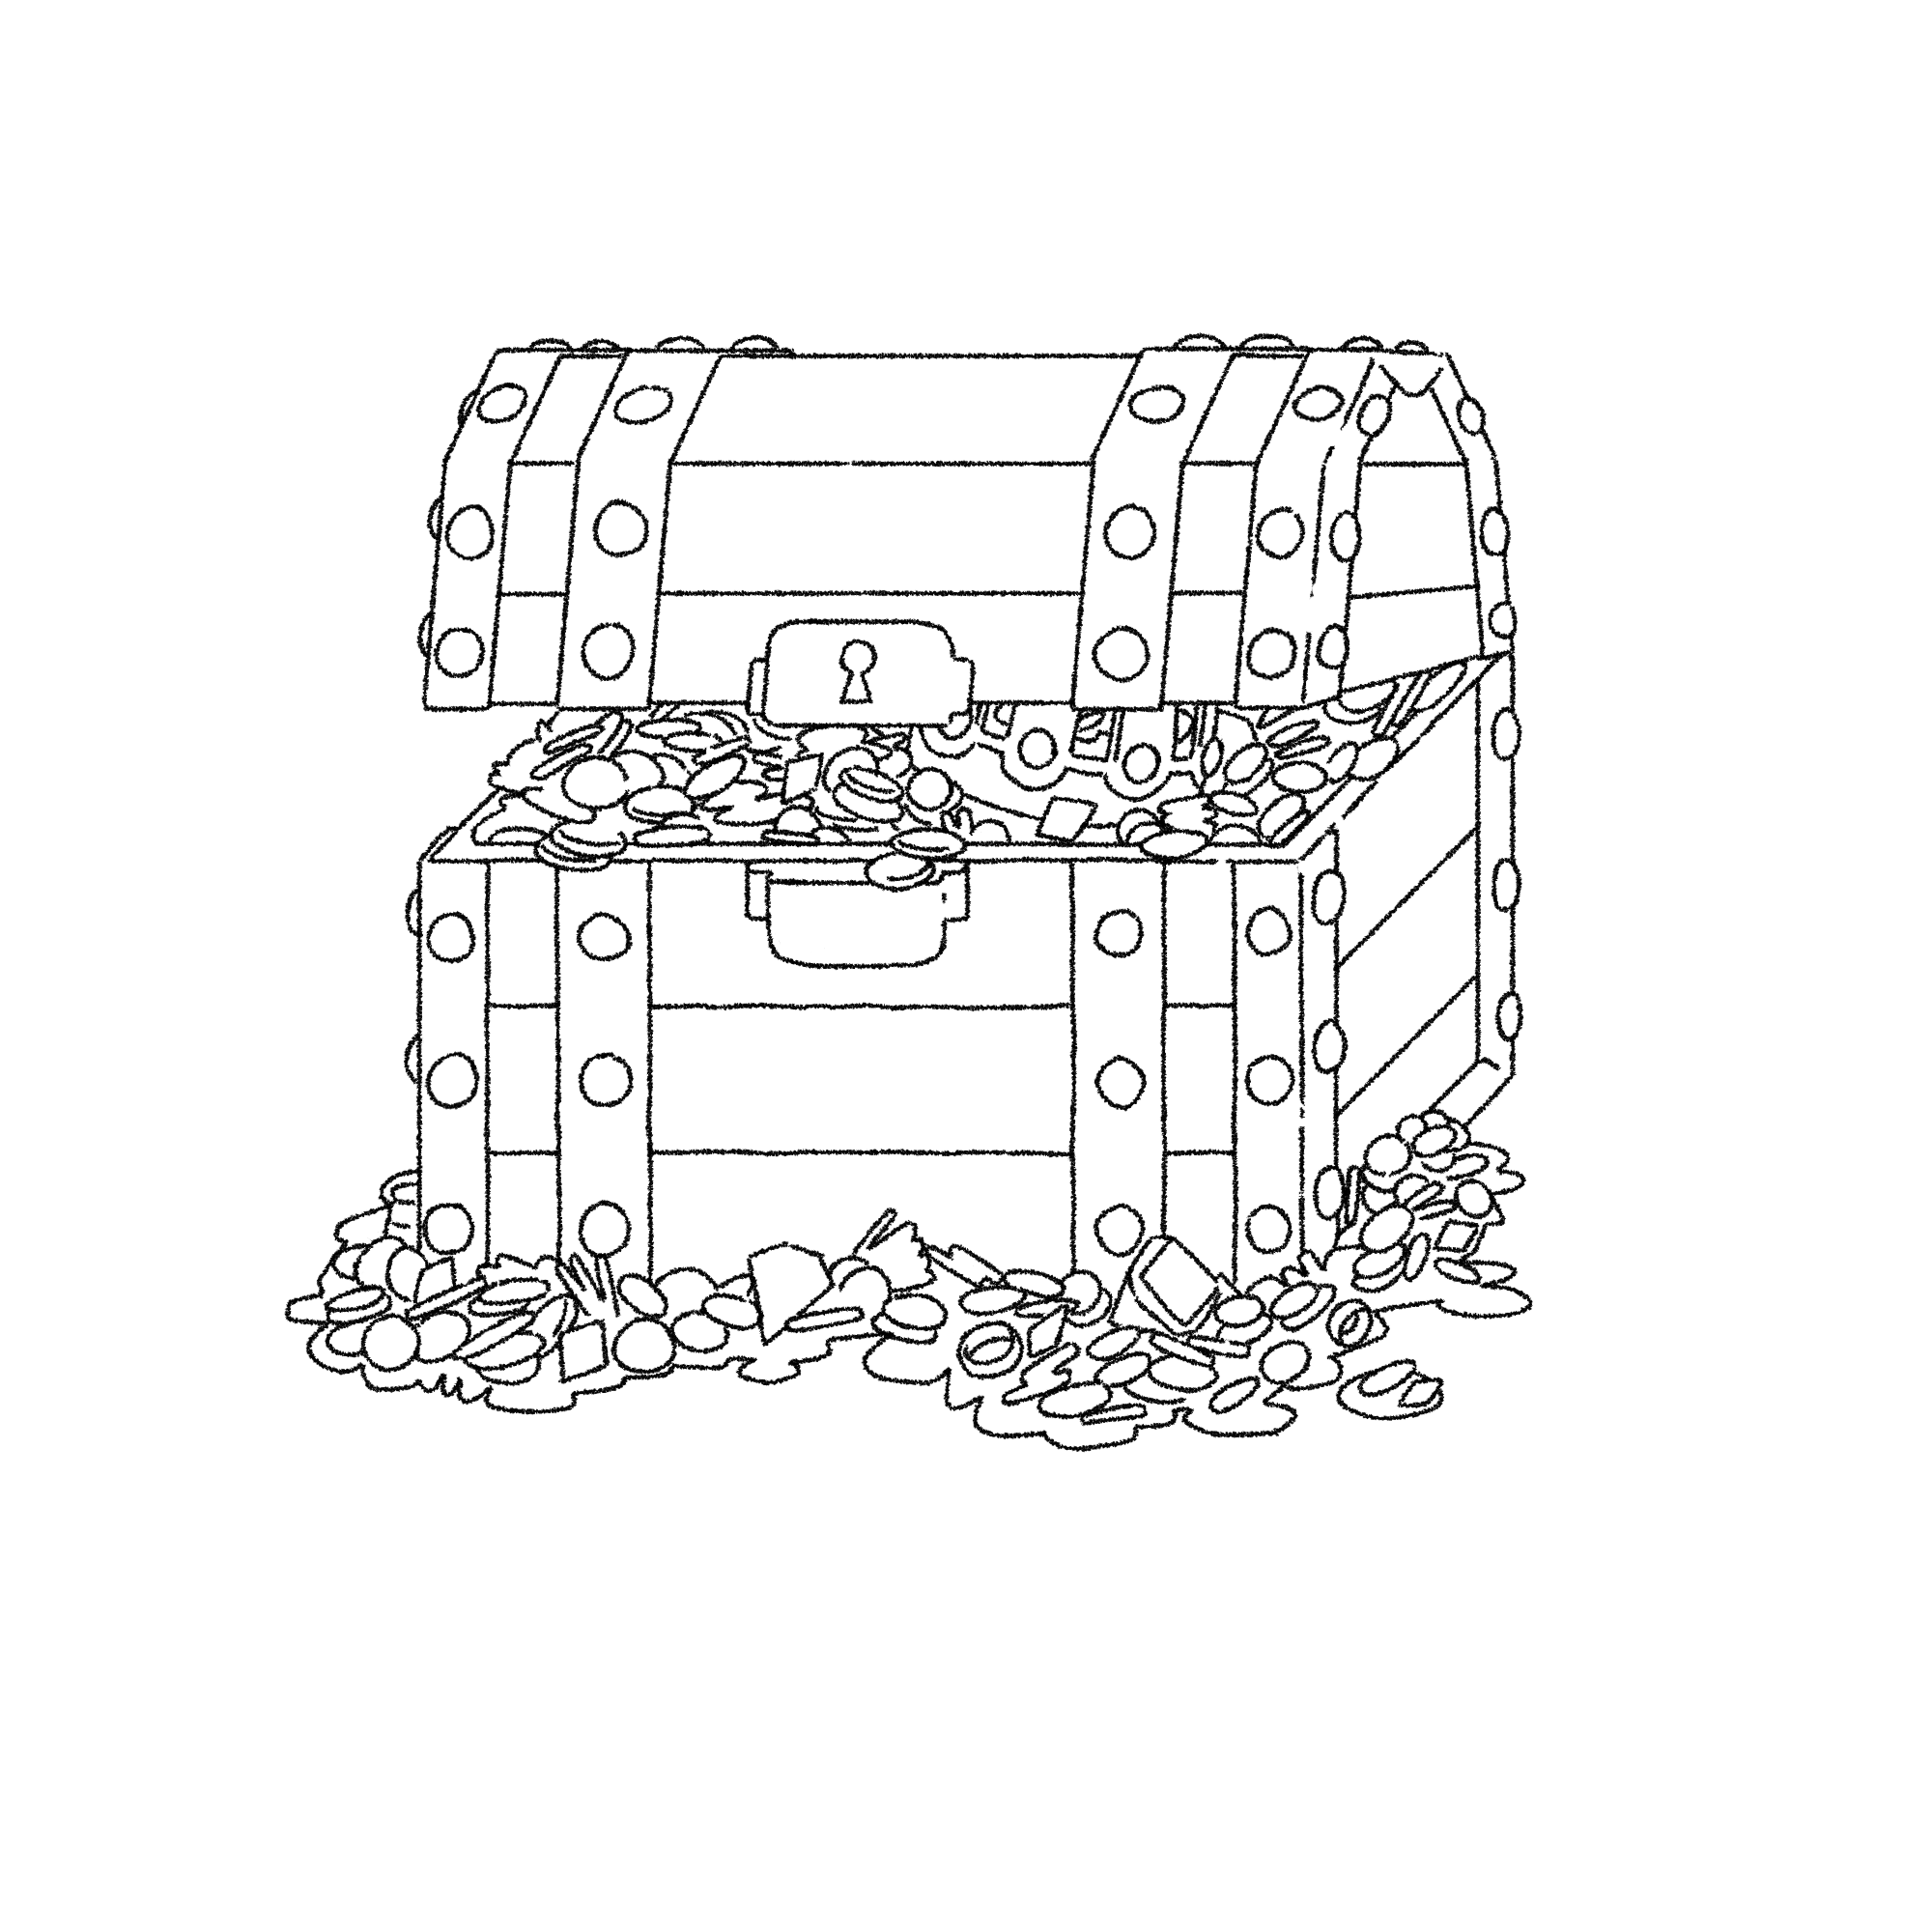 A Treasure Chest colouring outline